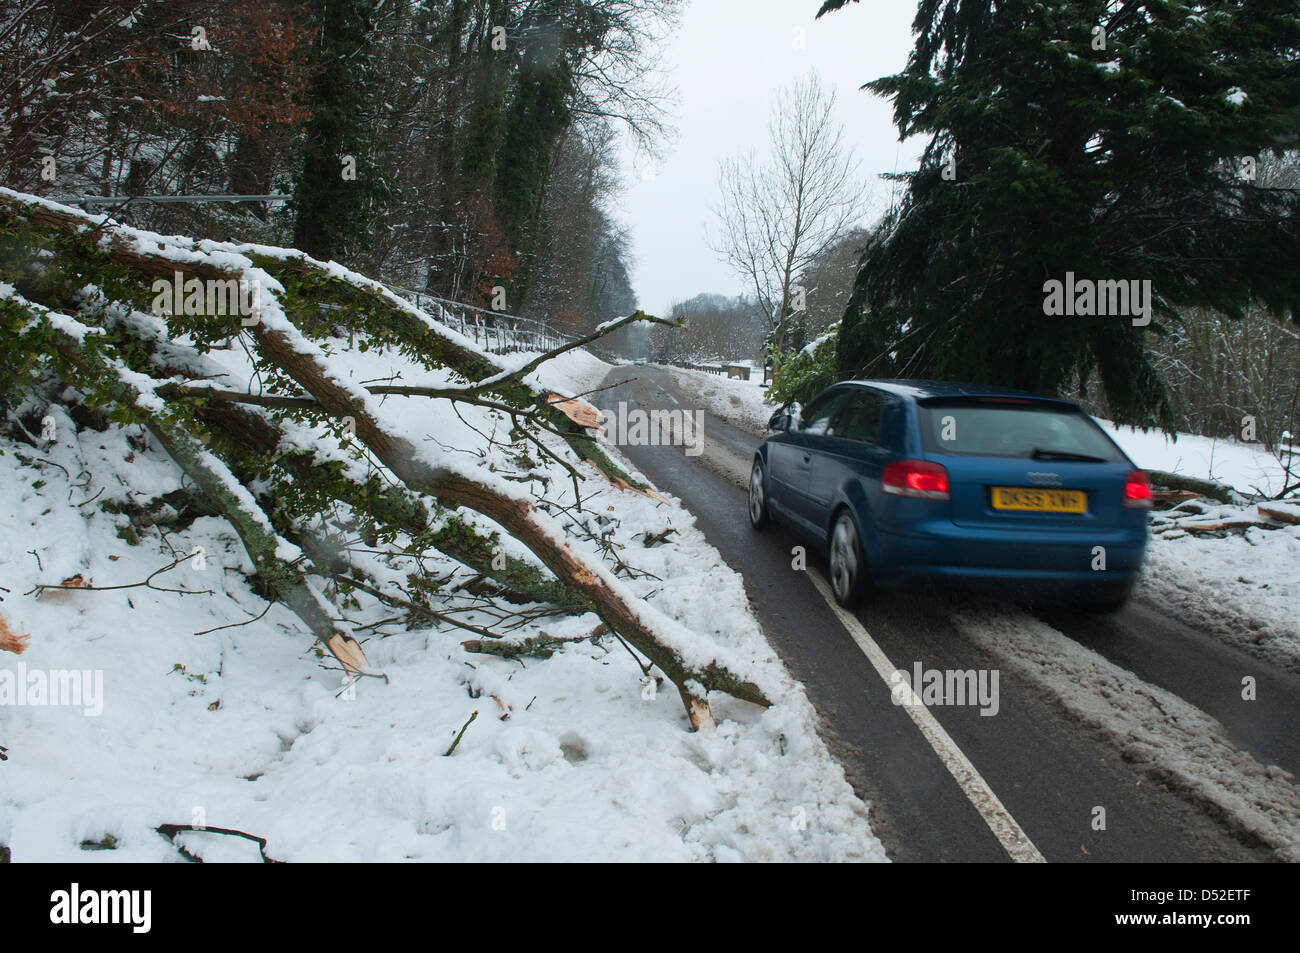 Llangollen, Wales, UK. 22nd March 2013. Trees were blown down blocking roads and heavy snow up to 20cms in places disrupted traffic in North Wales last night and today. Photo Credit: GRAHAM M LAWRENCE/Alamy Live News. Stock Photo